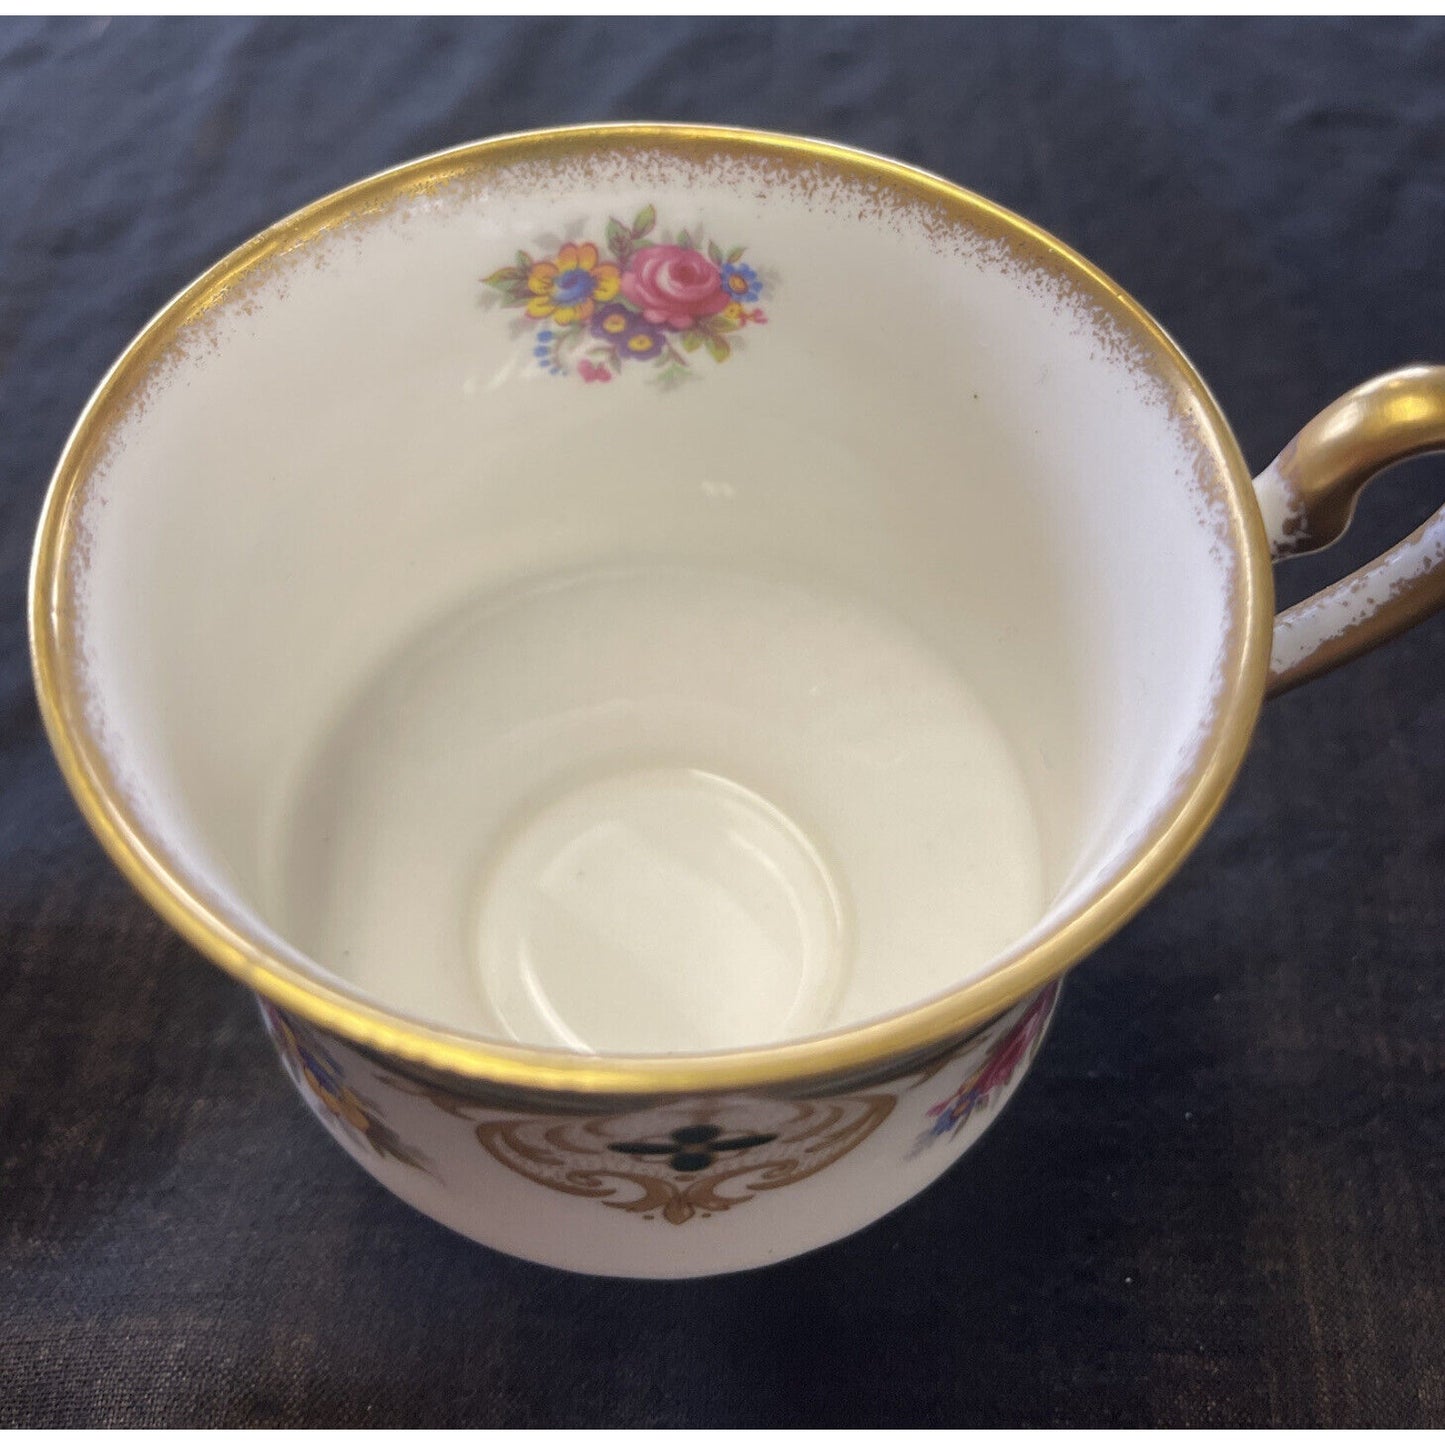 Abbeydale Hand Painted Floral Pattern Coffee Cup and Saucer circa 1960's